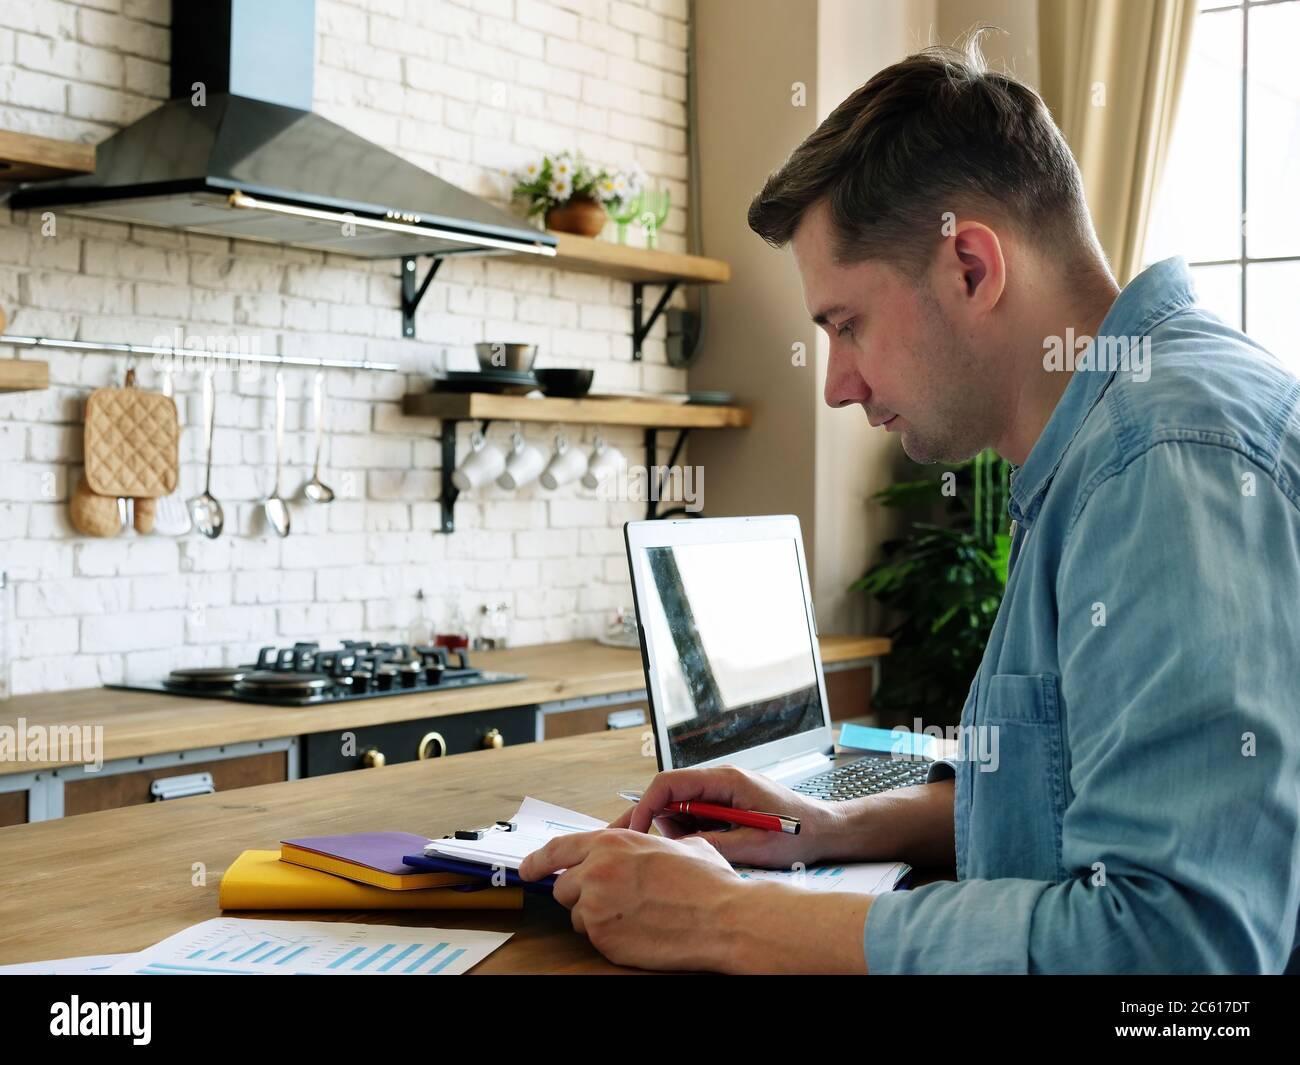 Work from home concept. A young man works with documents in the kitchen. Stock Photo